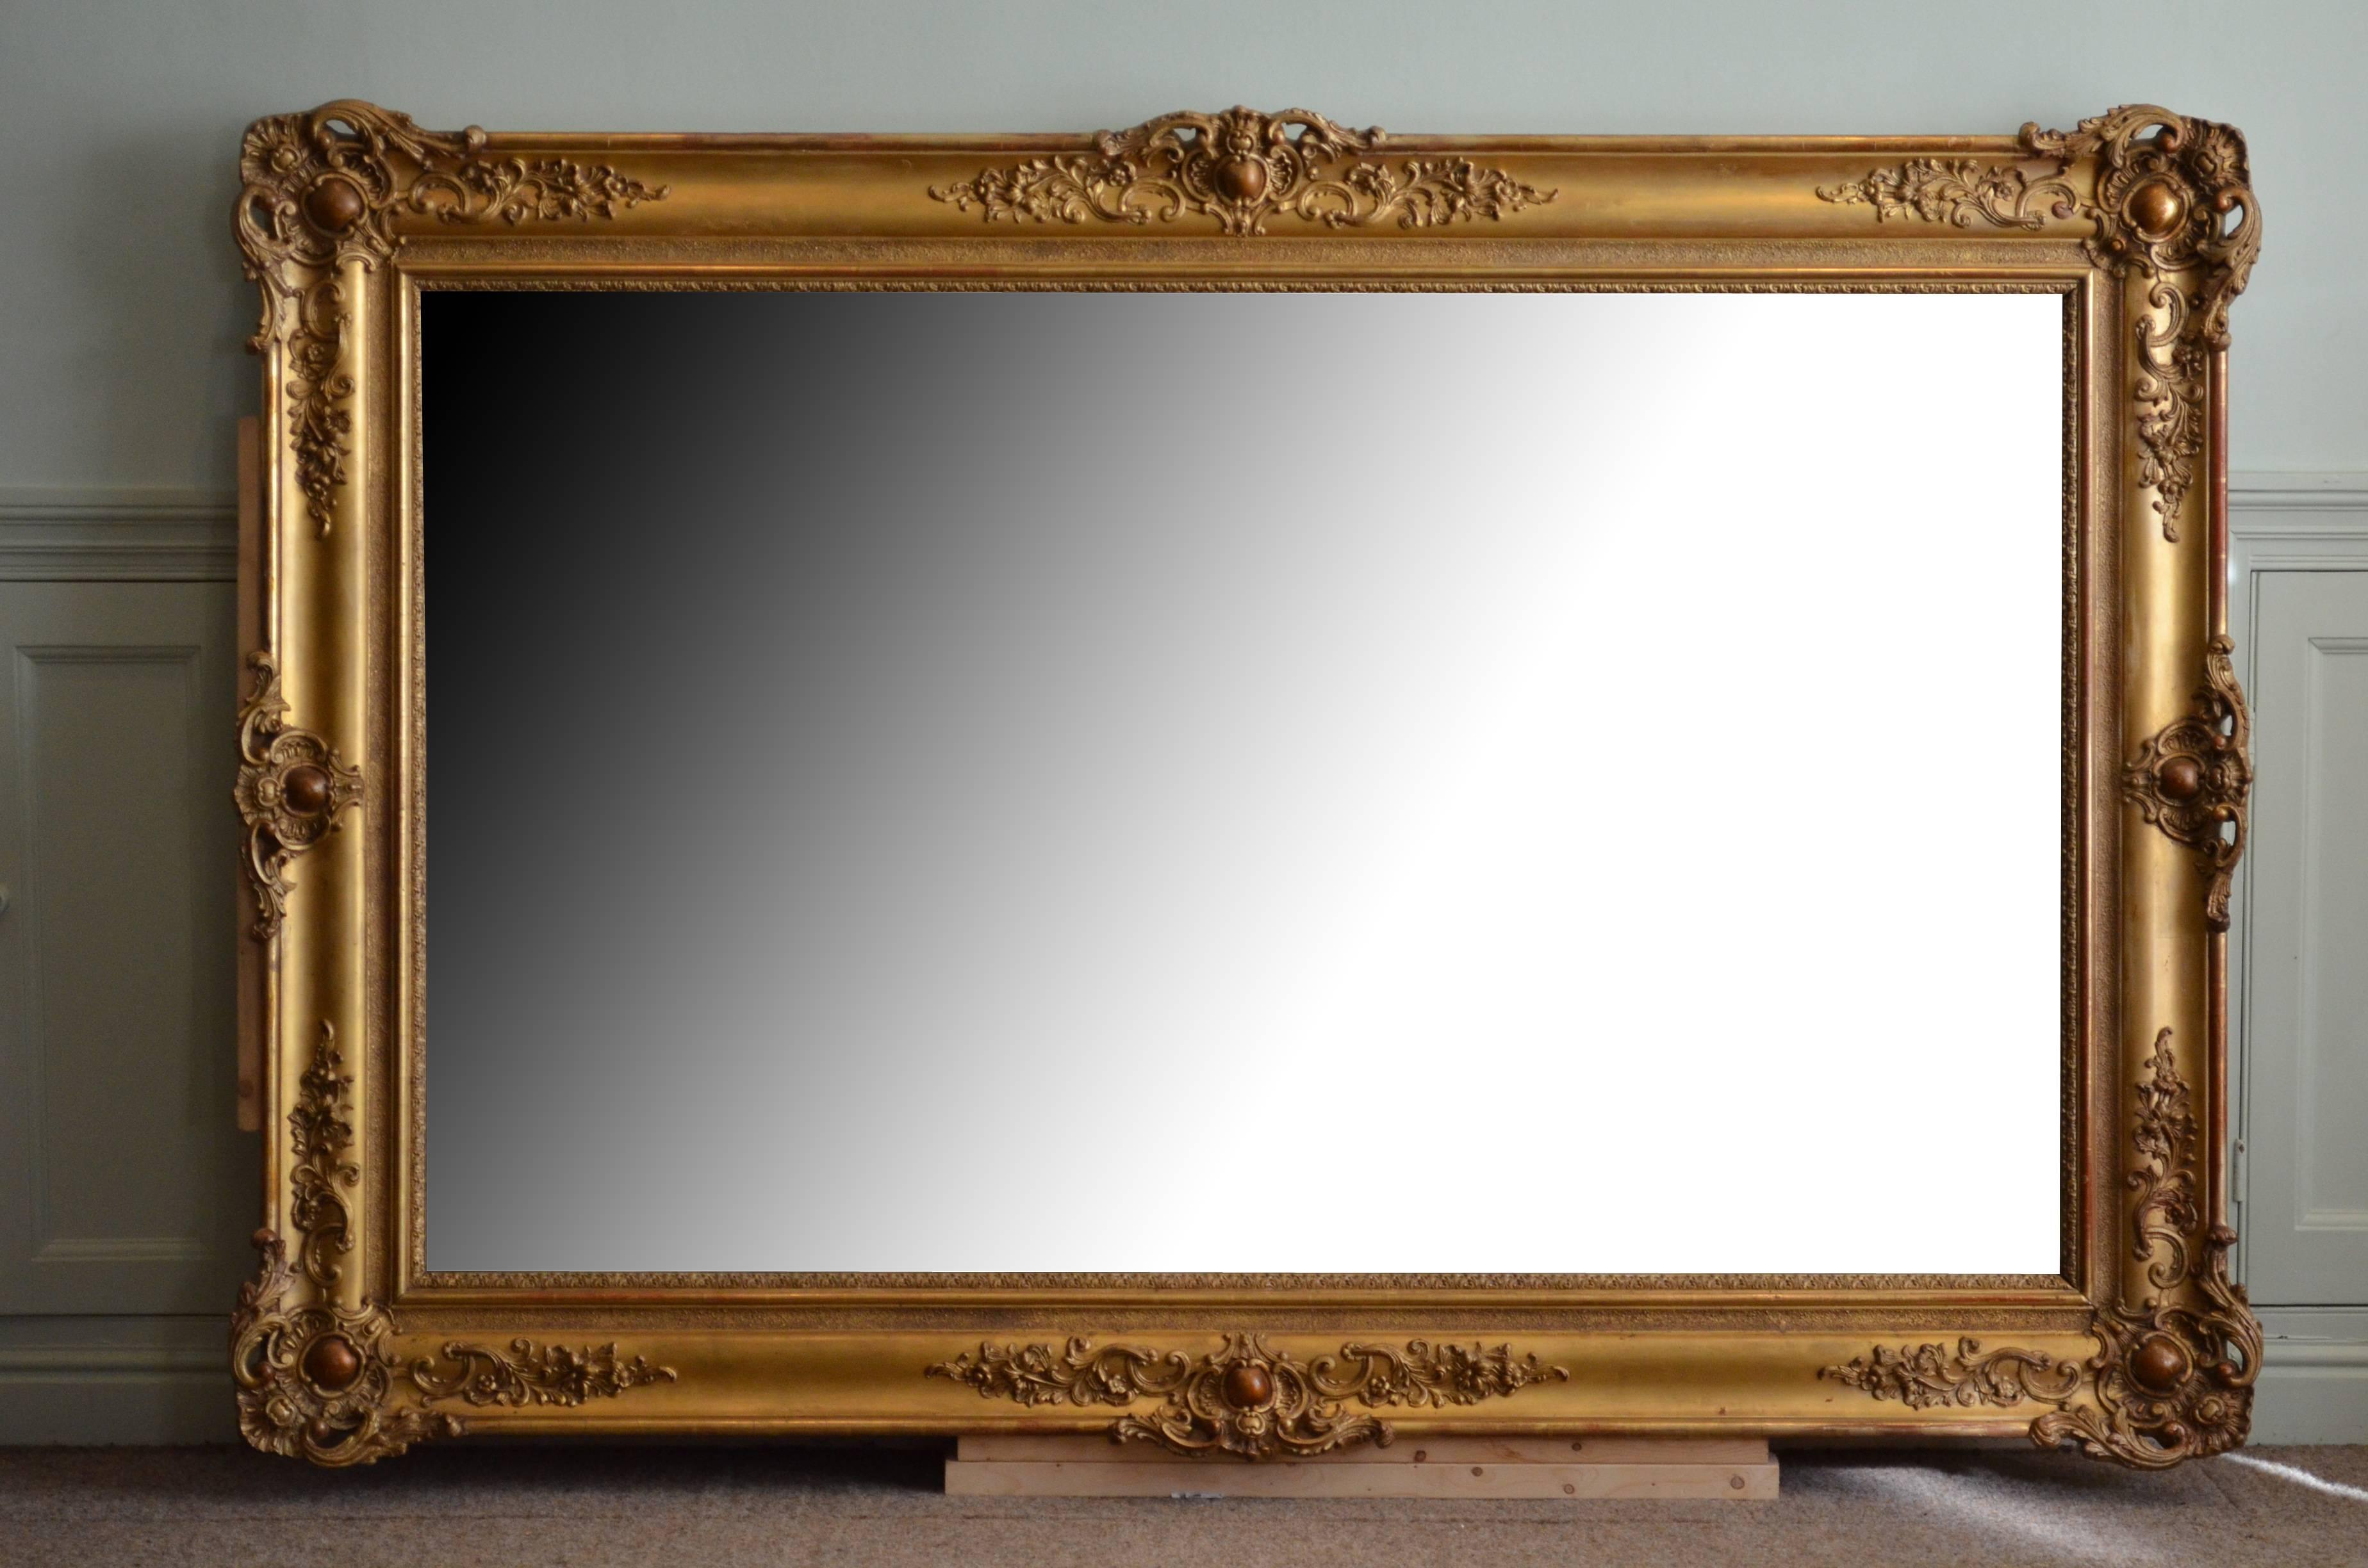 Sn4225 A XIXth century French mirror of versatile form could be positioned portrait and landscape ways, having original mirror plate with some foxing and imperfections in beautifully carved gilded frame. This fantastic mirror has been